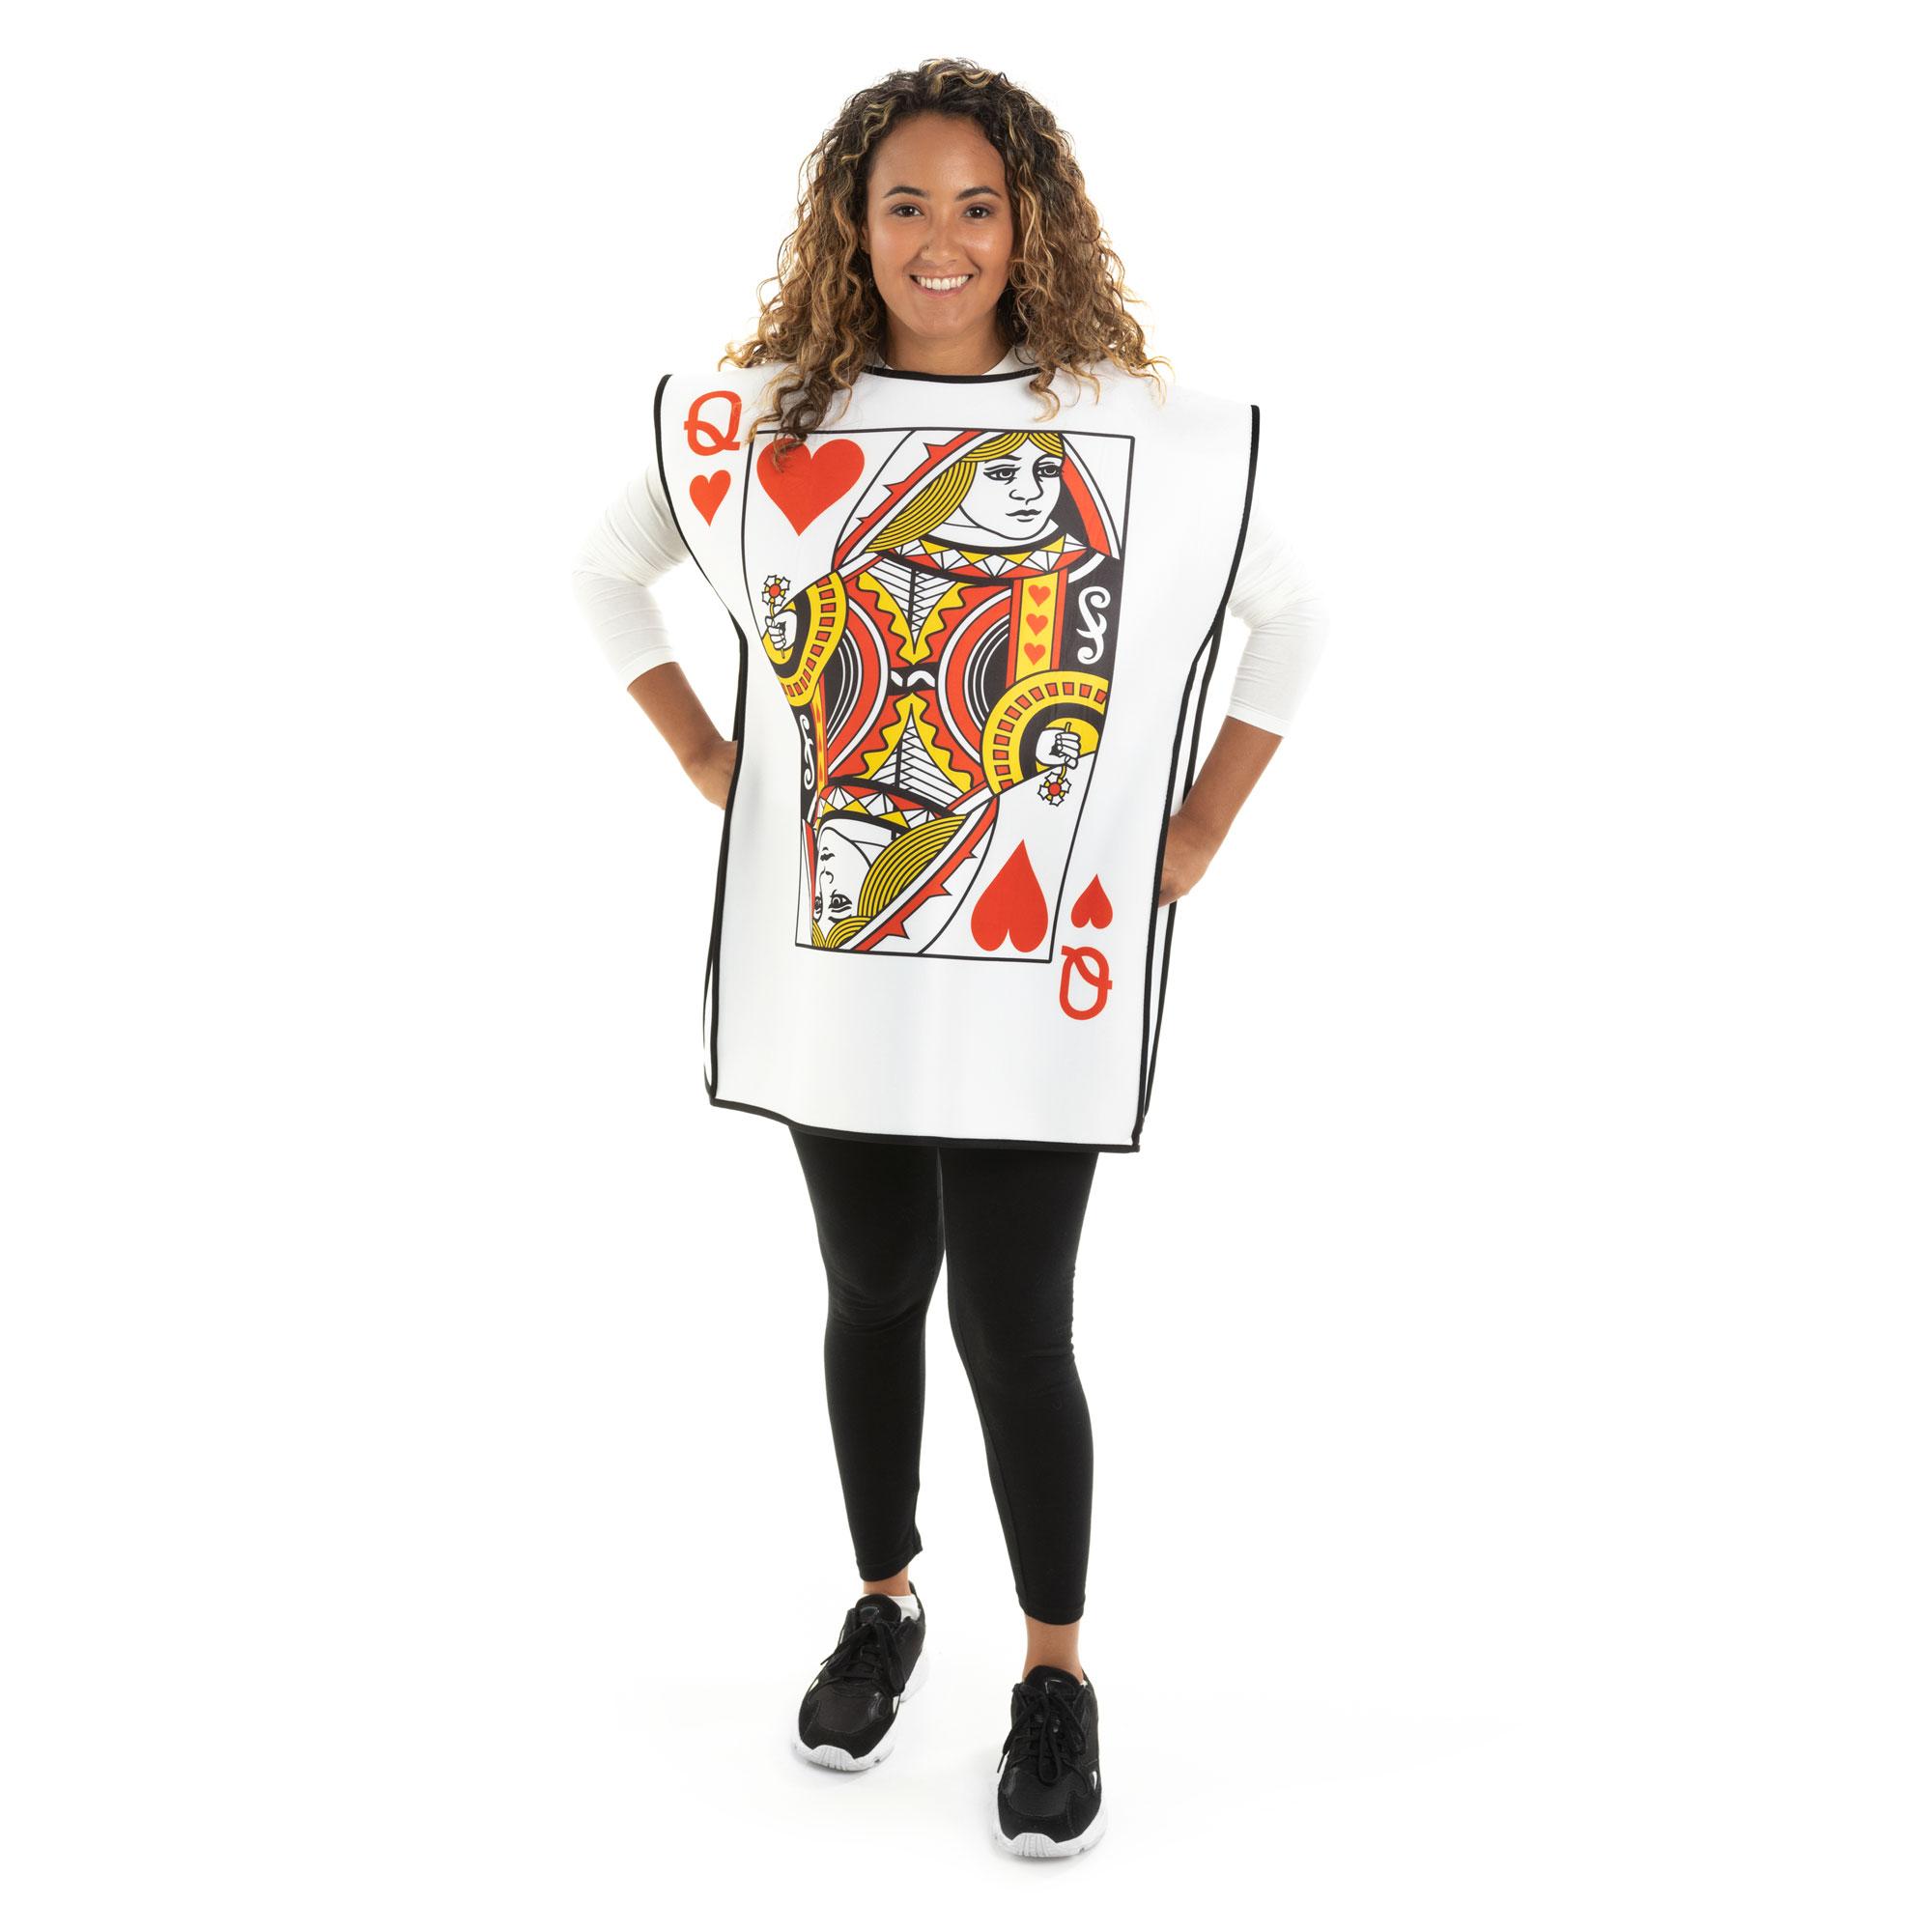 Playing Card Queen Costume